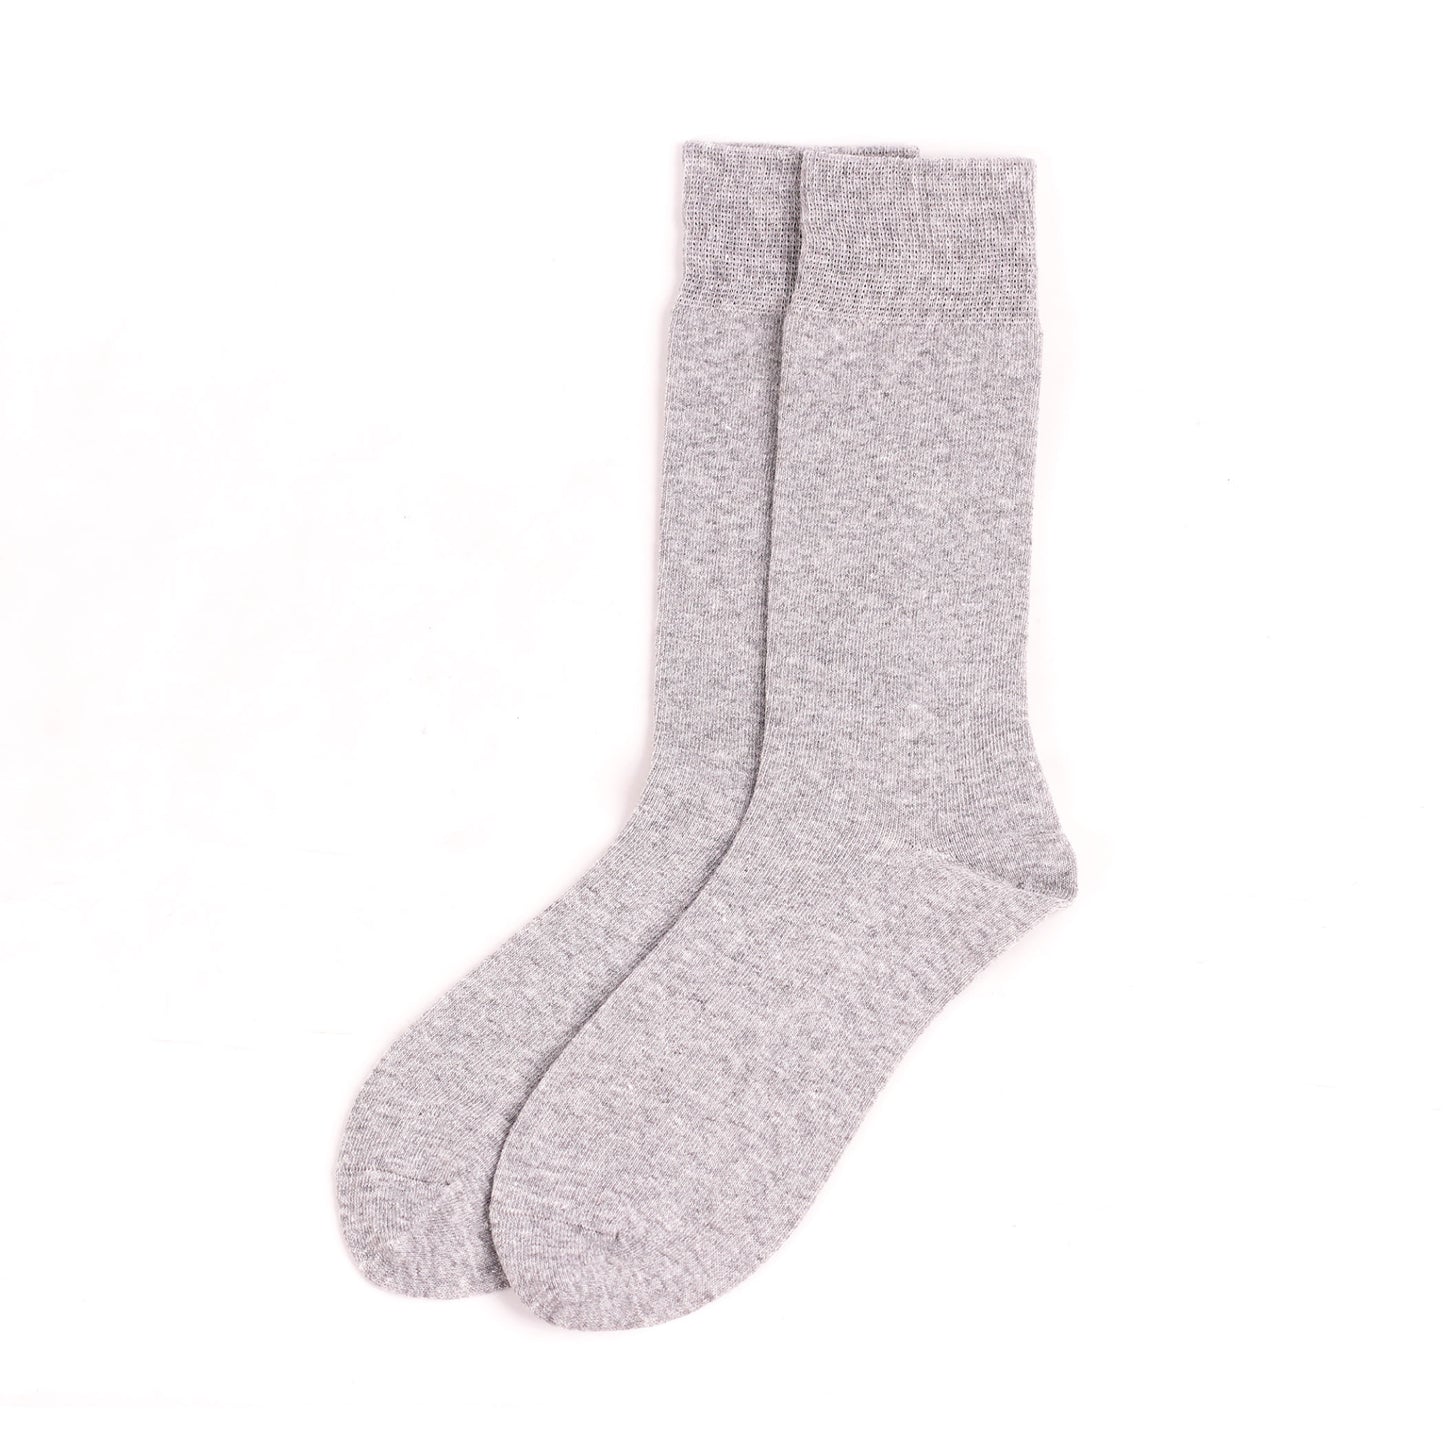 Recycle Socks - Solid Gray